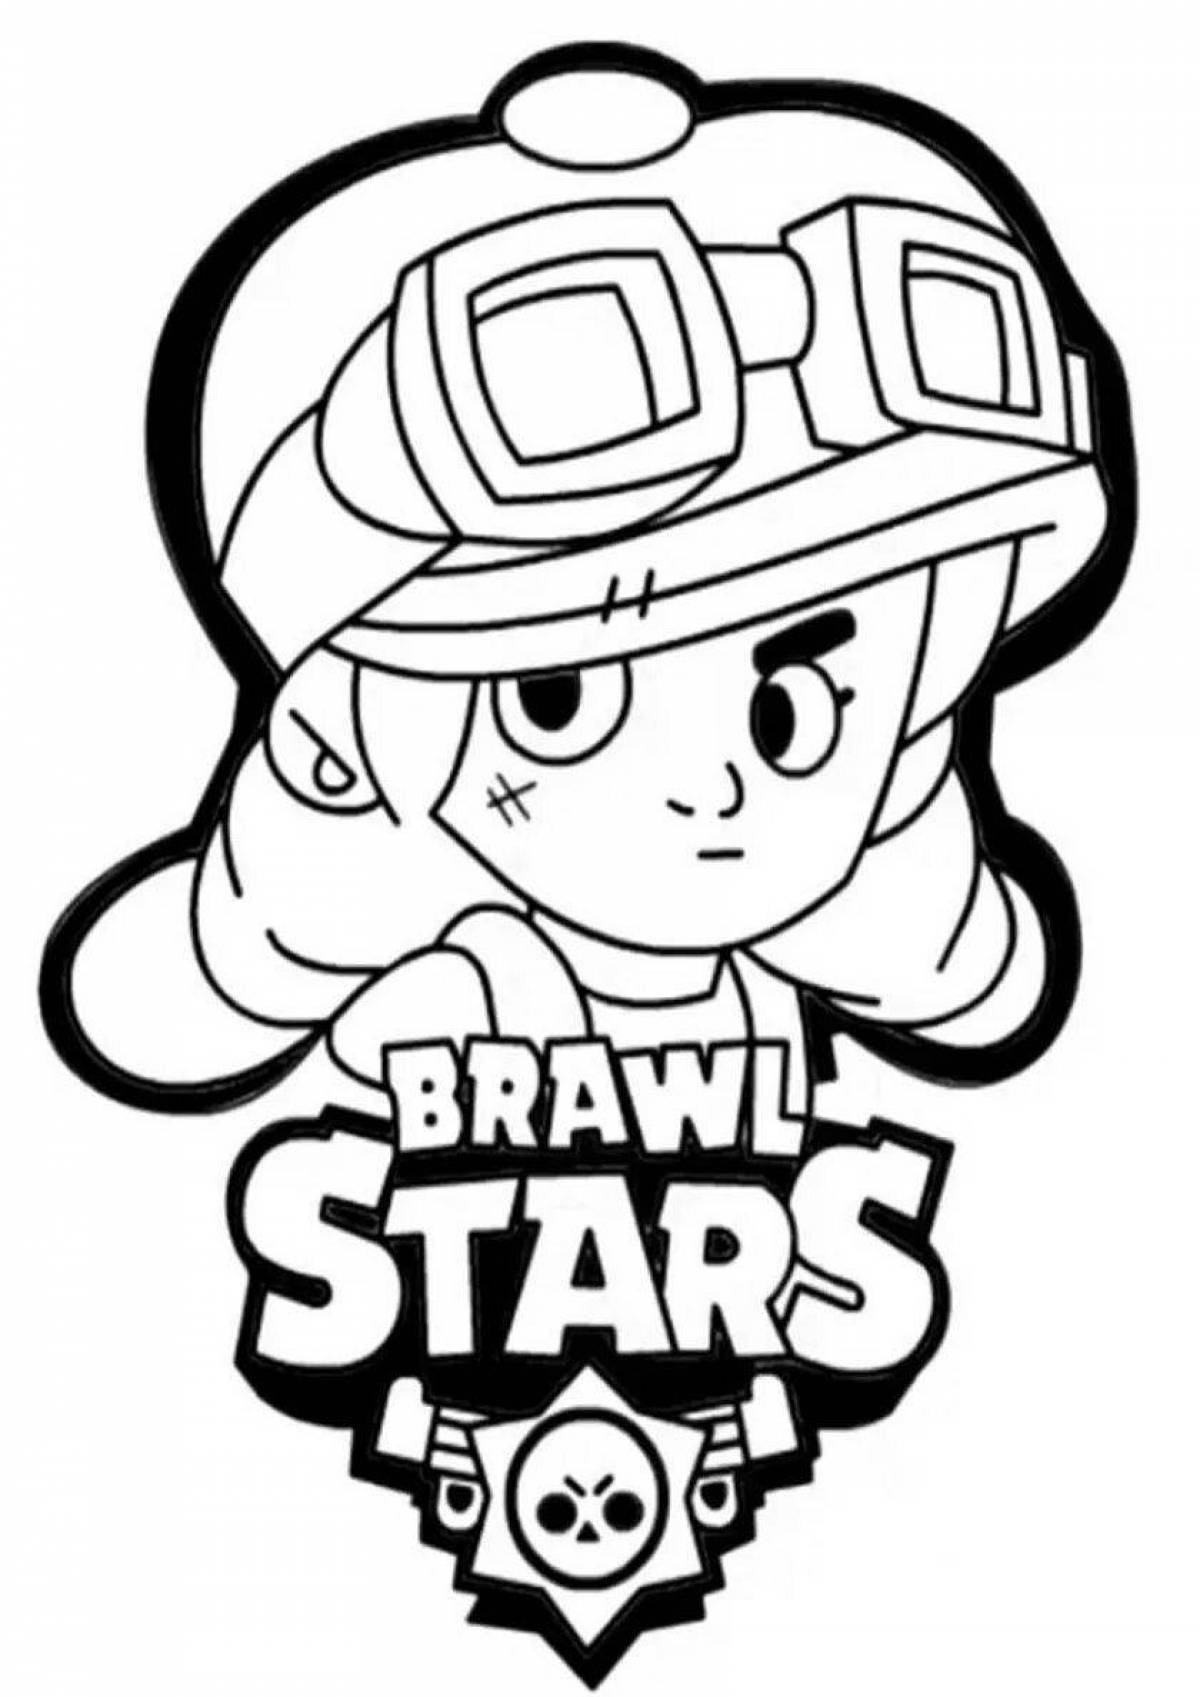 Charming stars coloring page